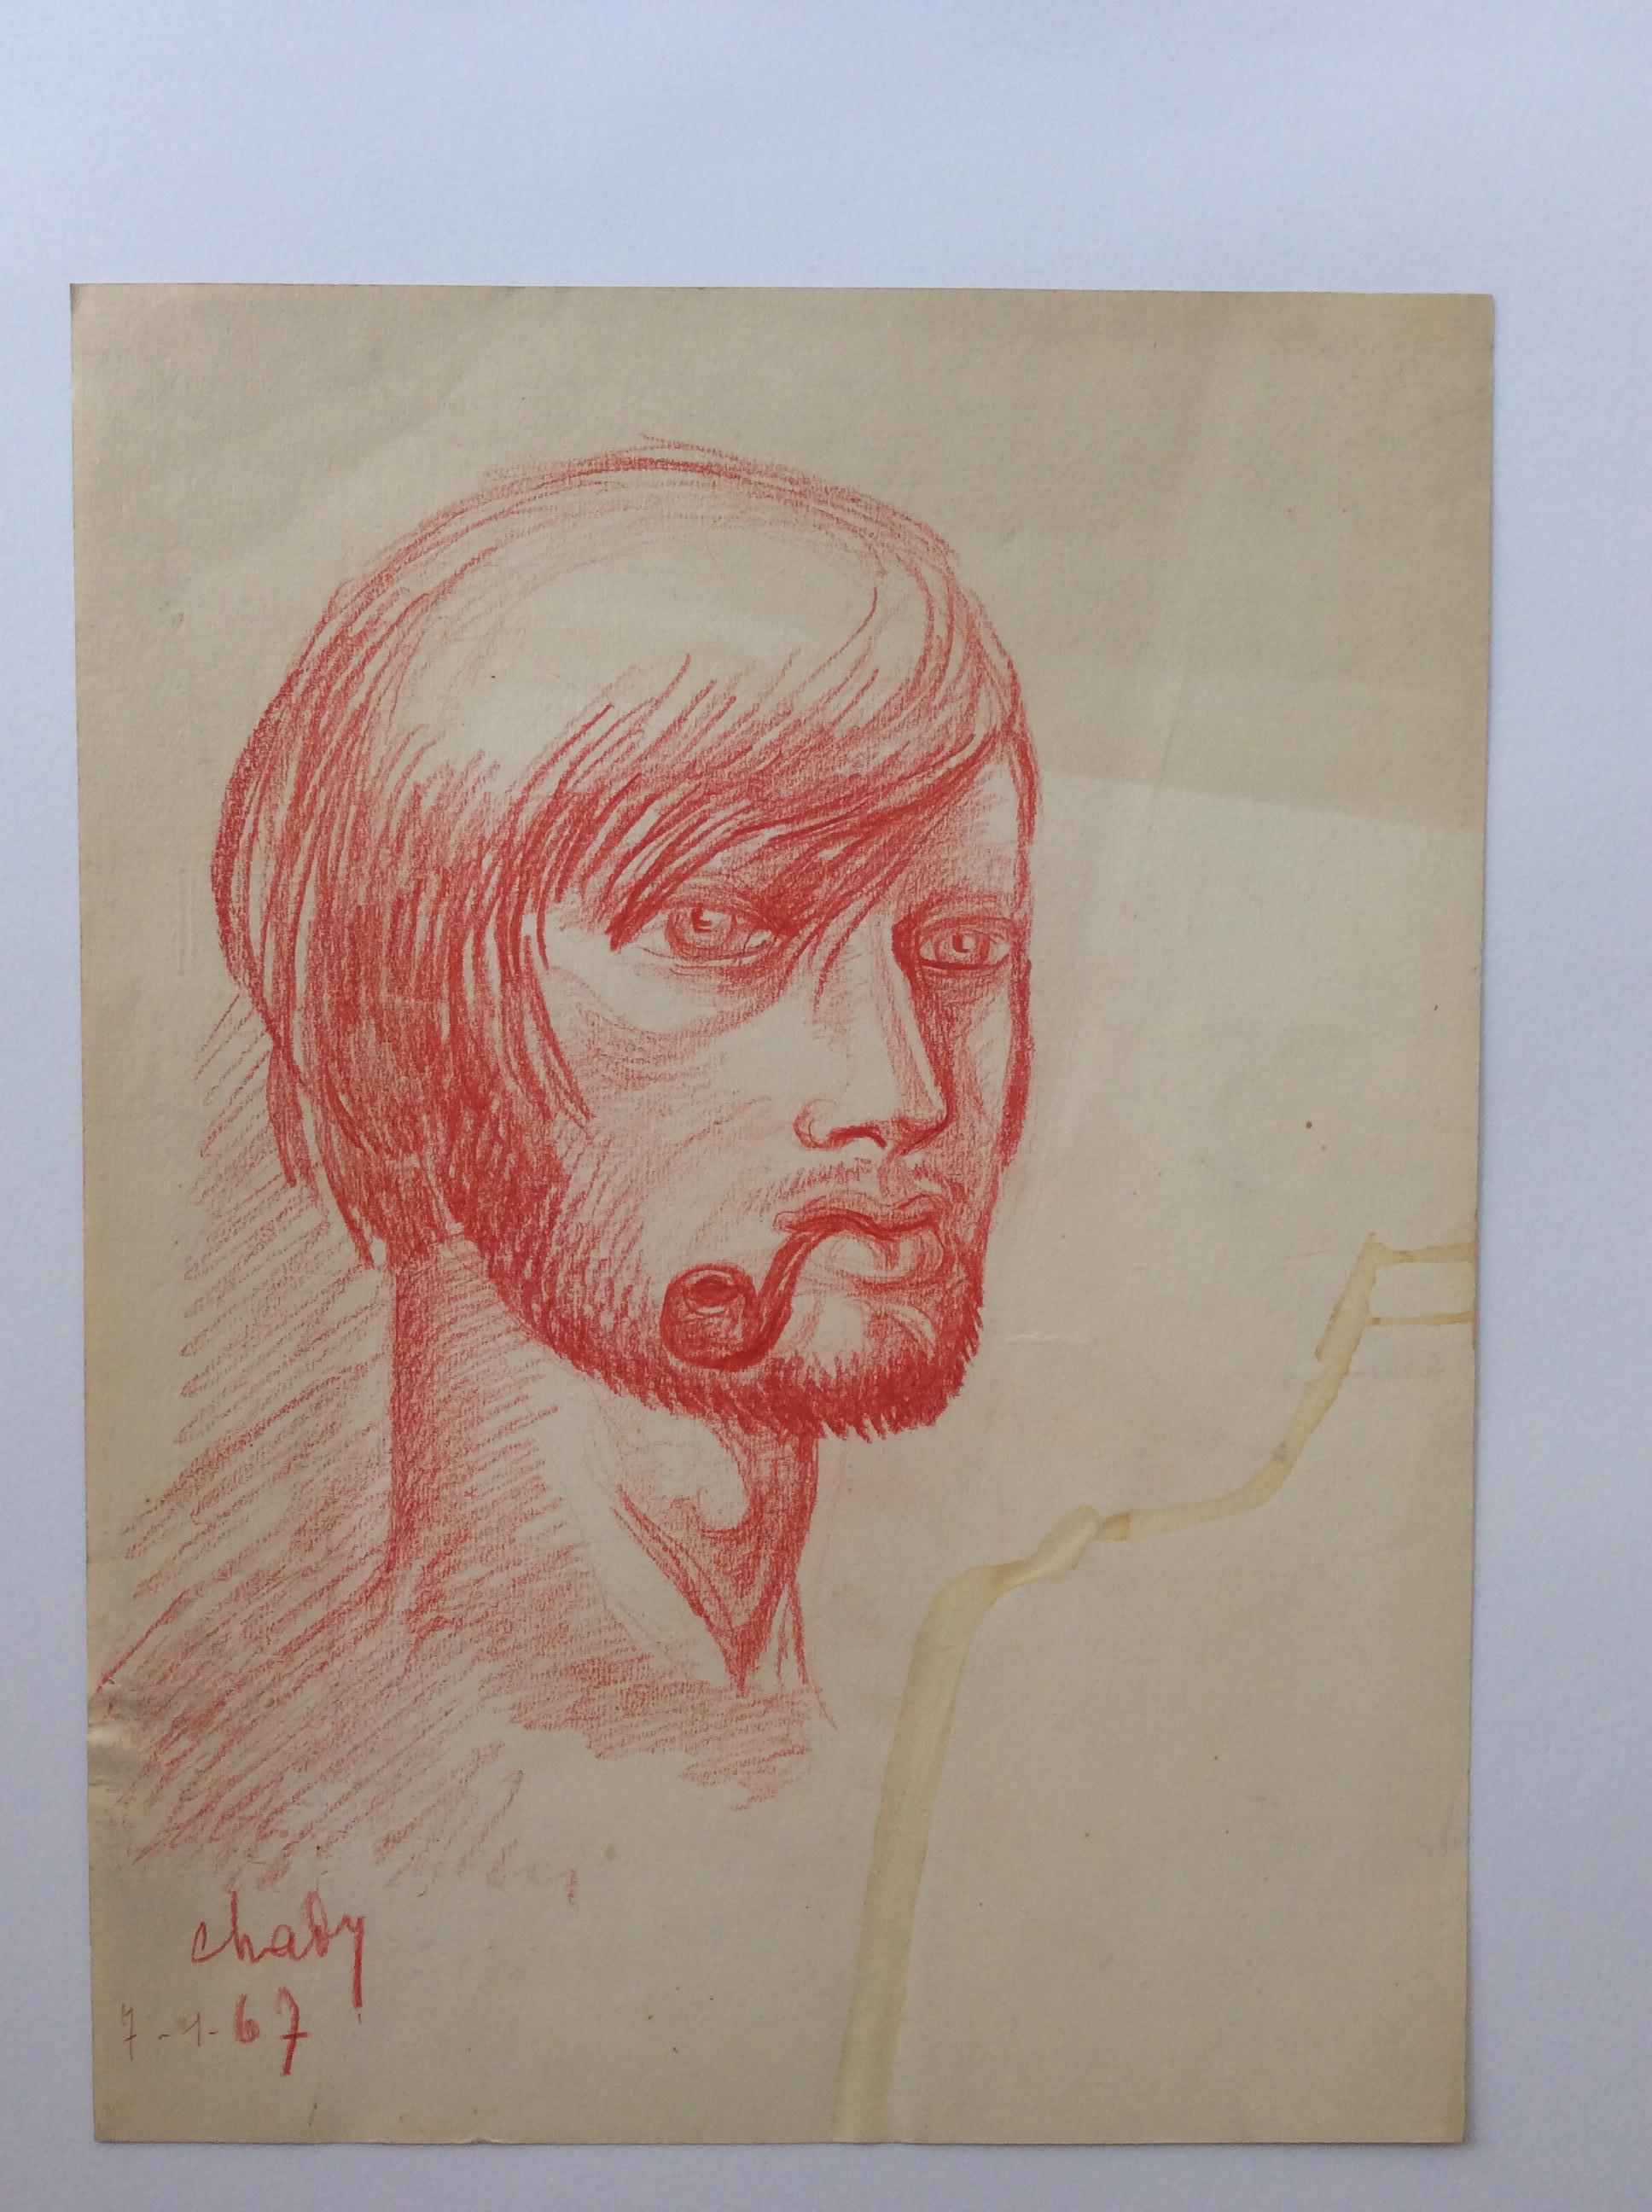 Very handsome original portrait drawing signed Chady, dated 1967. 
This interesting piece of art resembles Vincent van Gogh's self portrait. 

Measures: Width 9.50 in x Height 12.50 in.
 